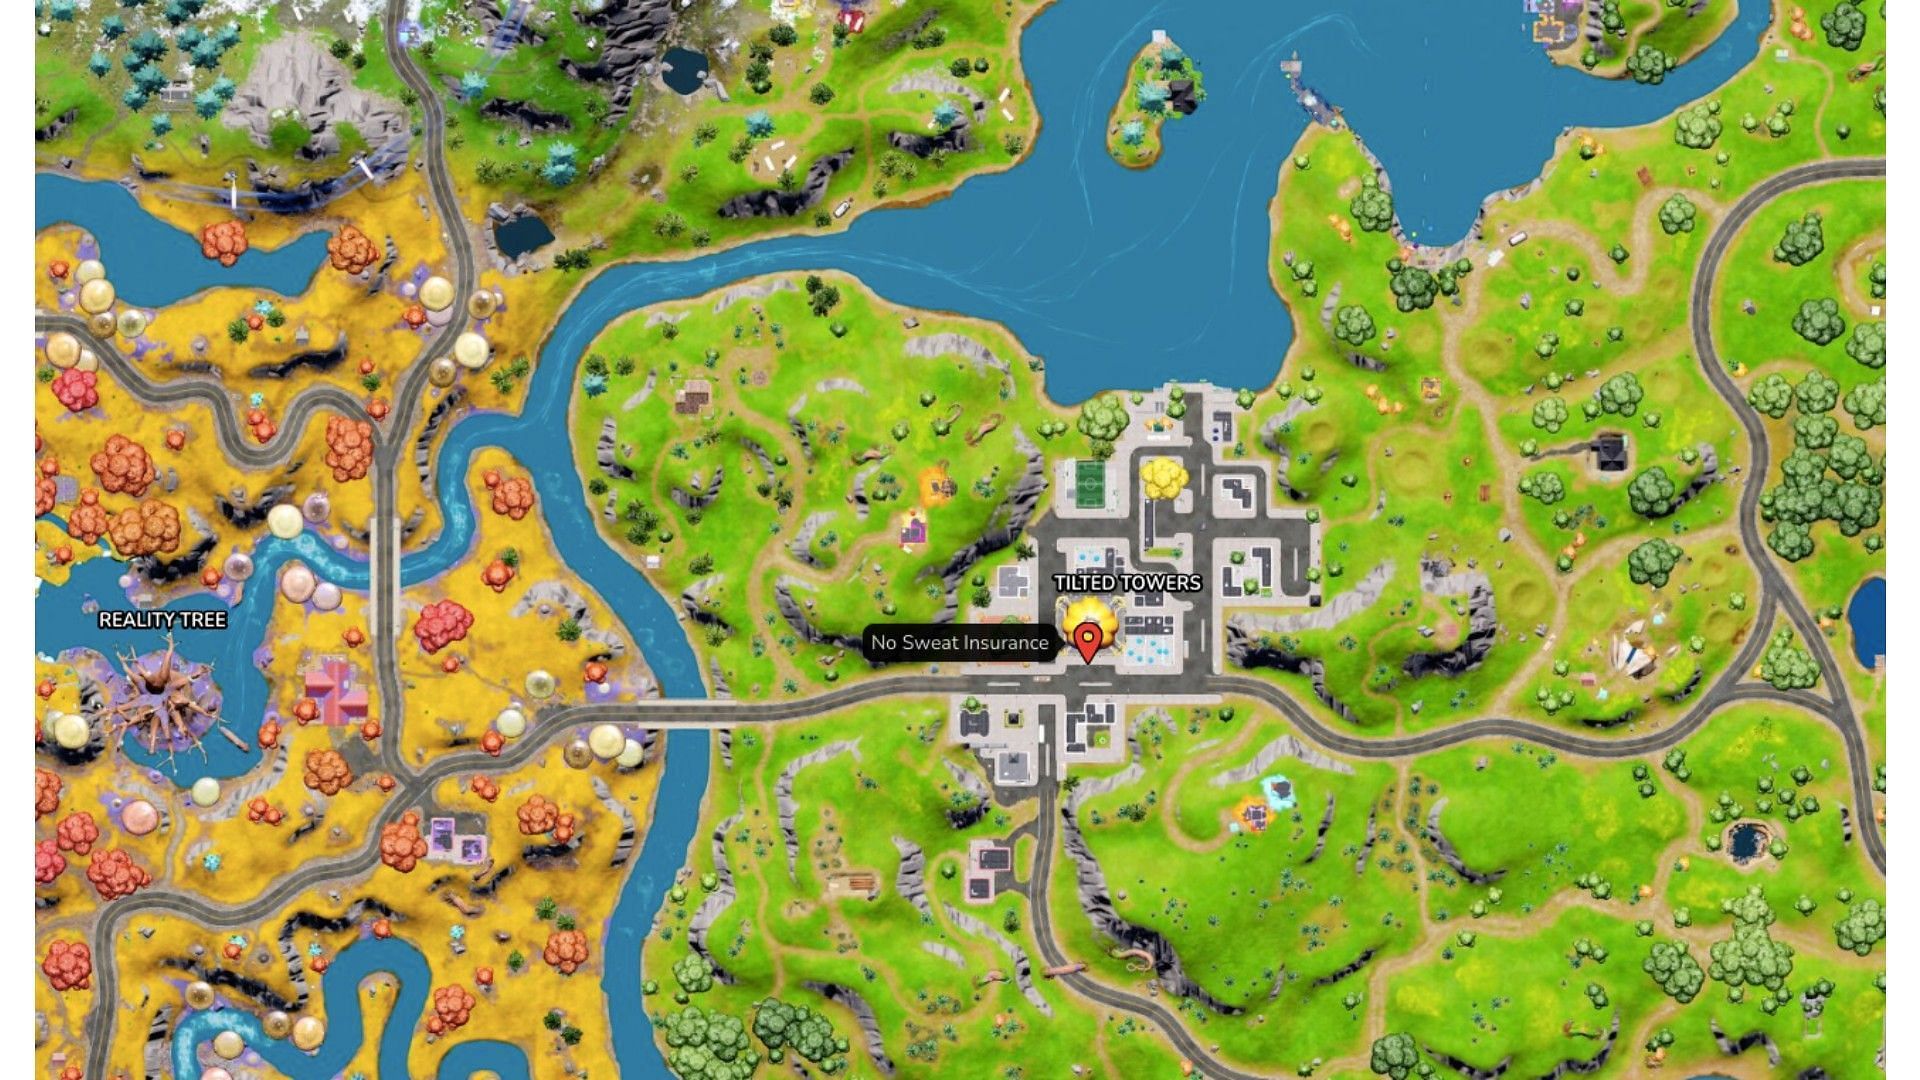 No Sweat Insurance is located east of the Reality Tree (Image via Fortnite.gg)